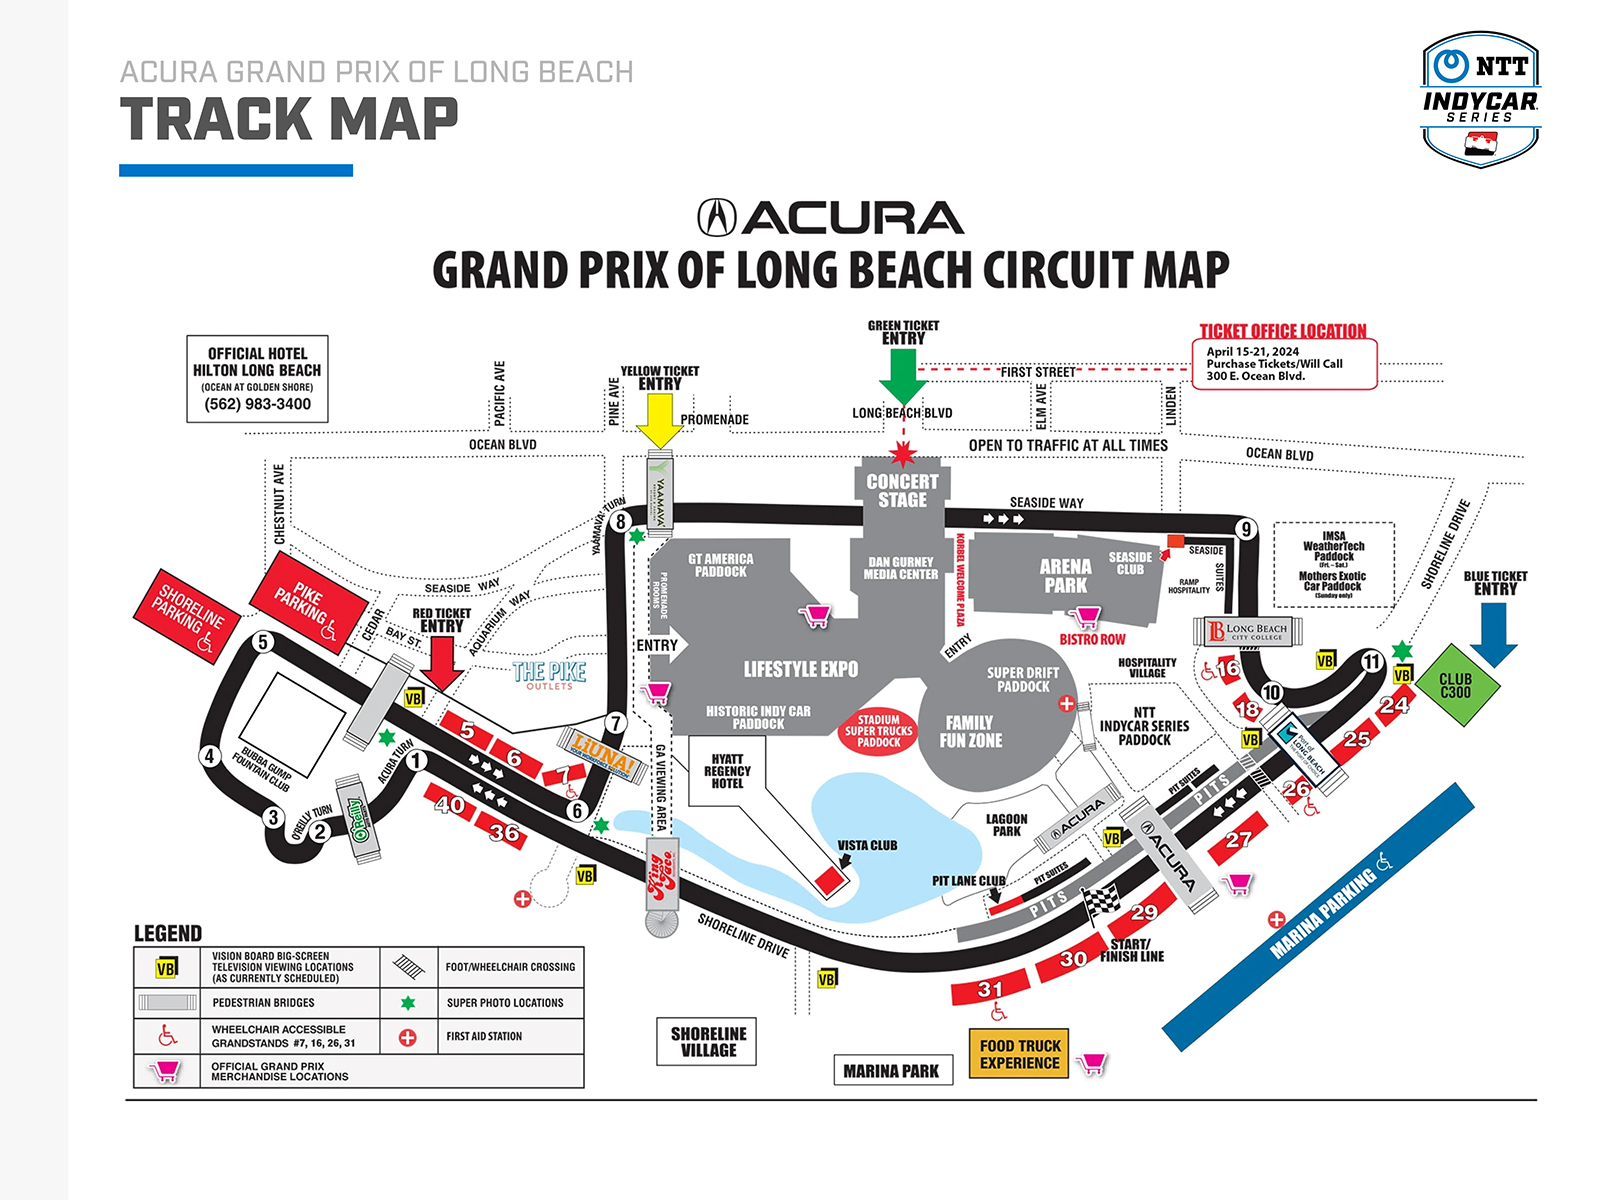 INDYCAR Preview 2023 Acura Grand Prix Of Long Beach